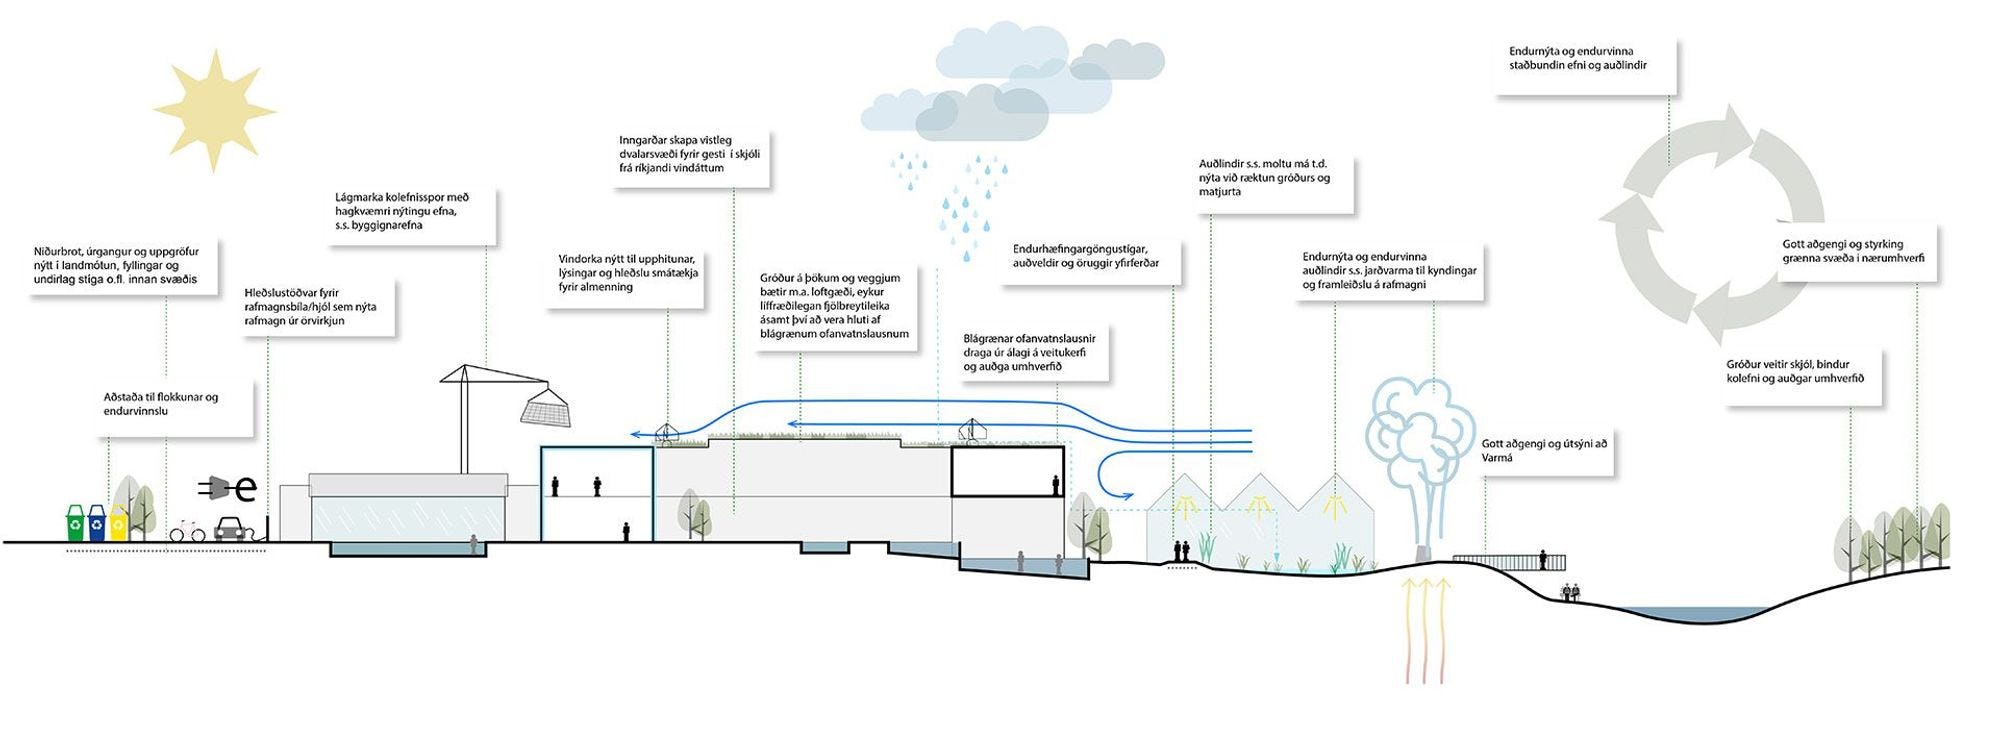 A diagram illustrating environmental or water management system